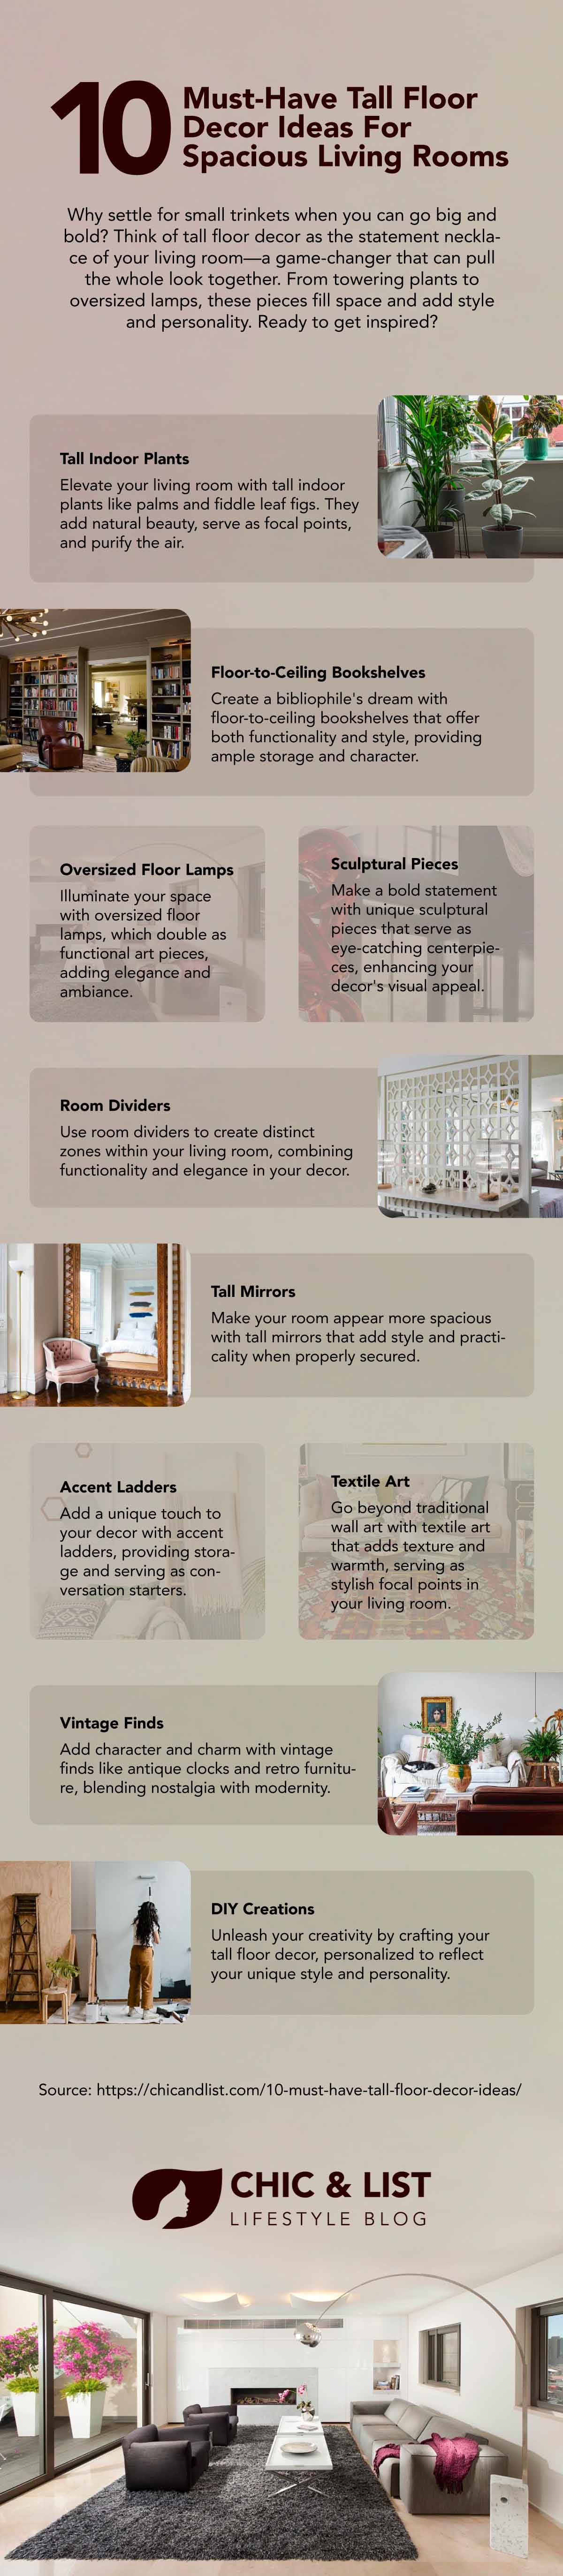 10 Must-Have Tall Floor Decor Ideas for Spacious Living Rooms Infographic